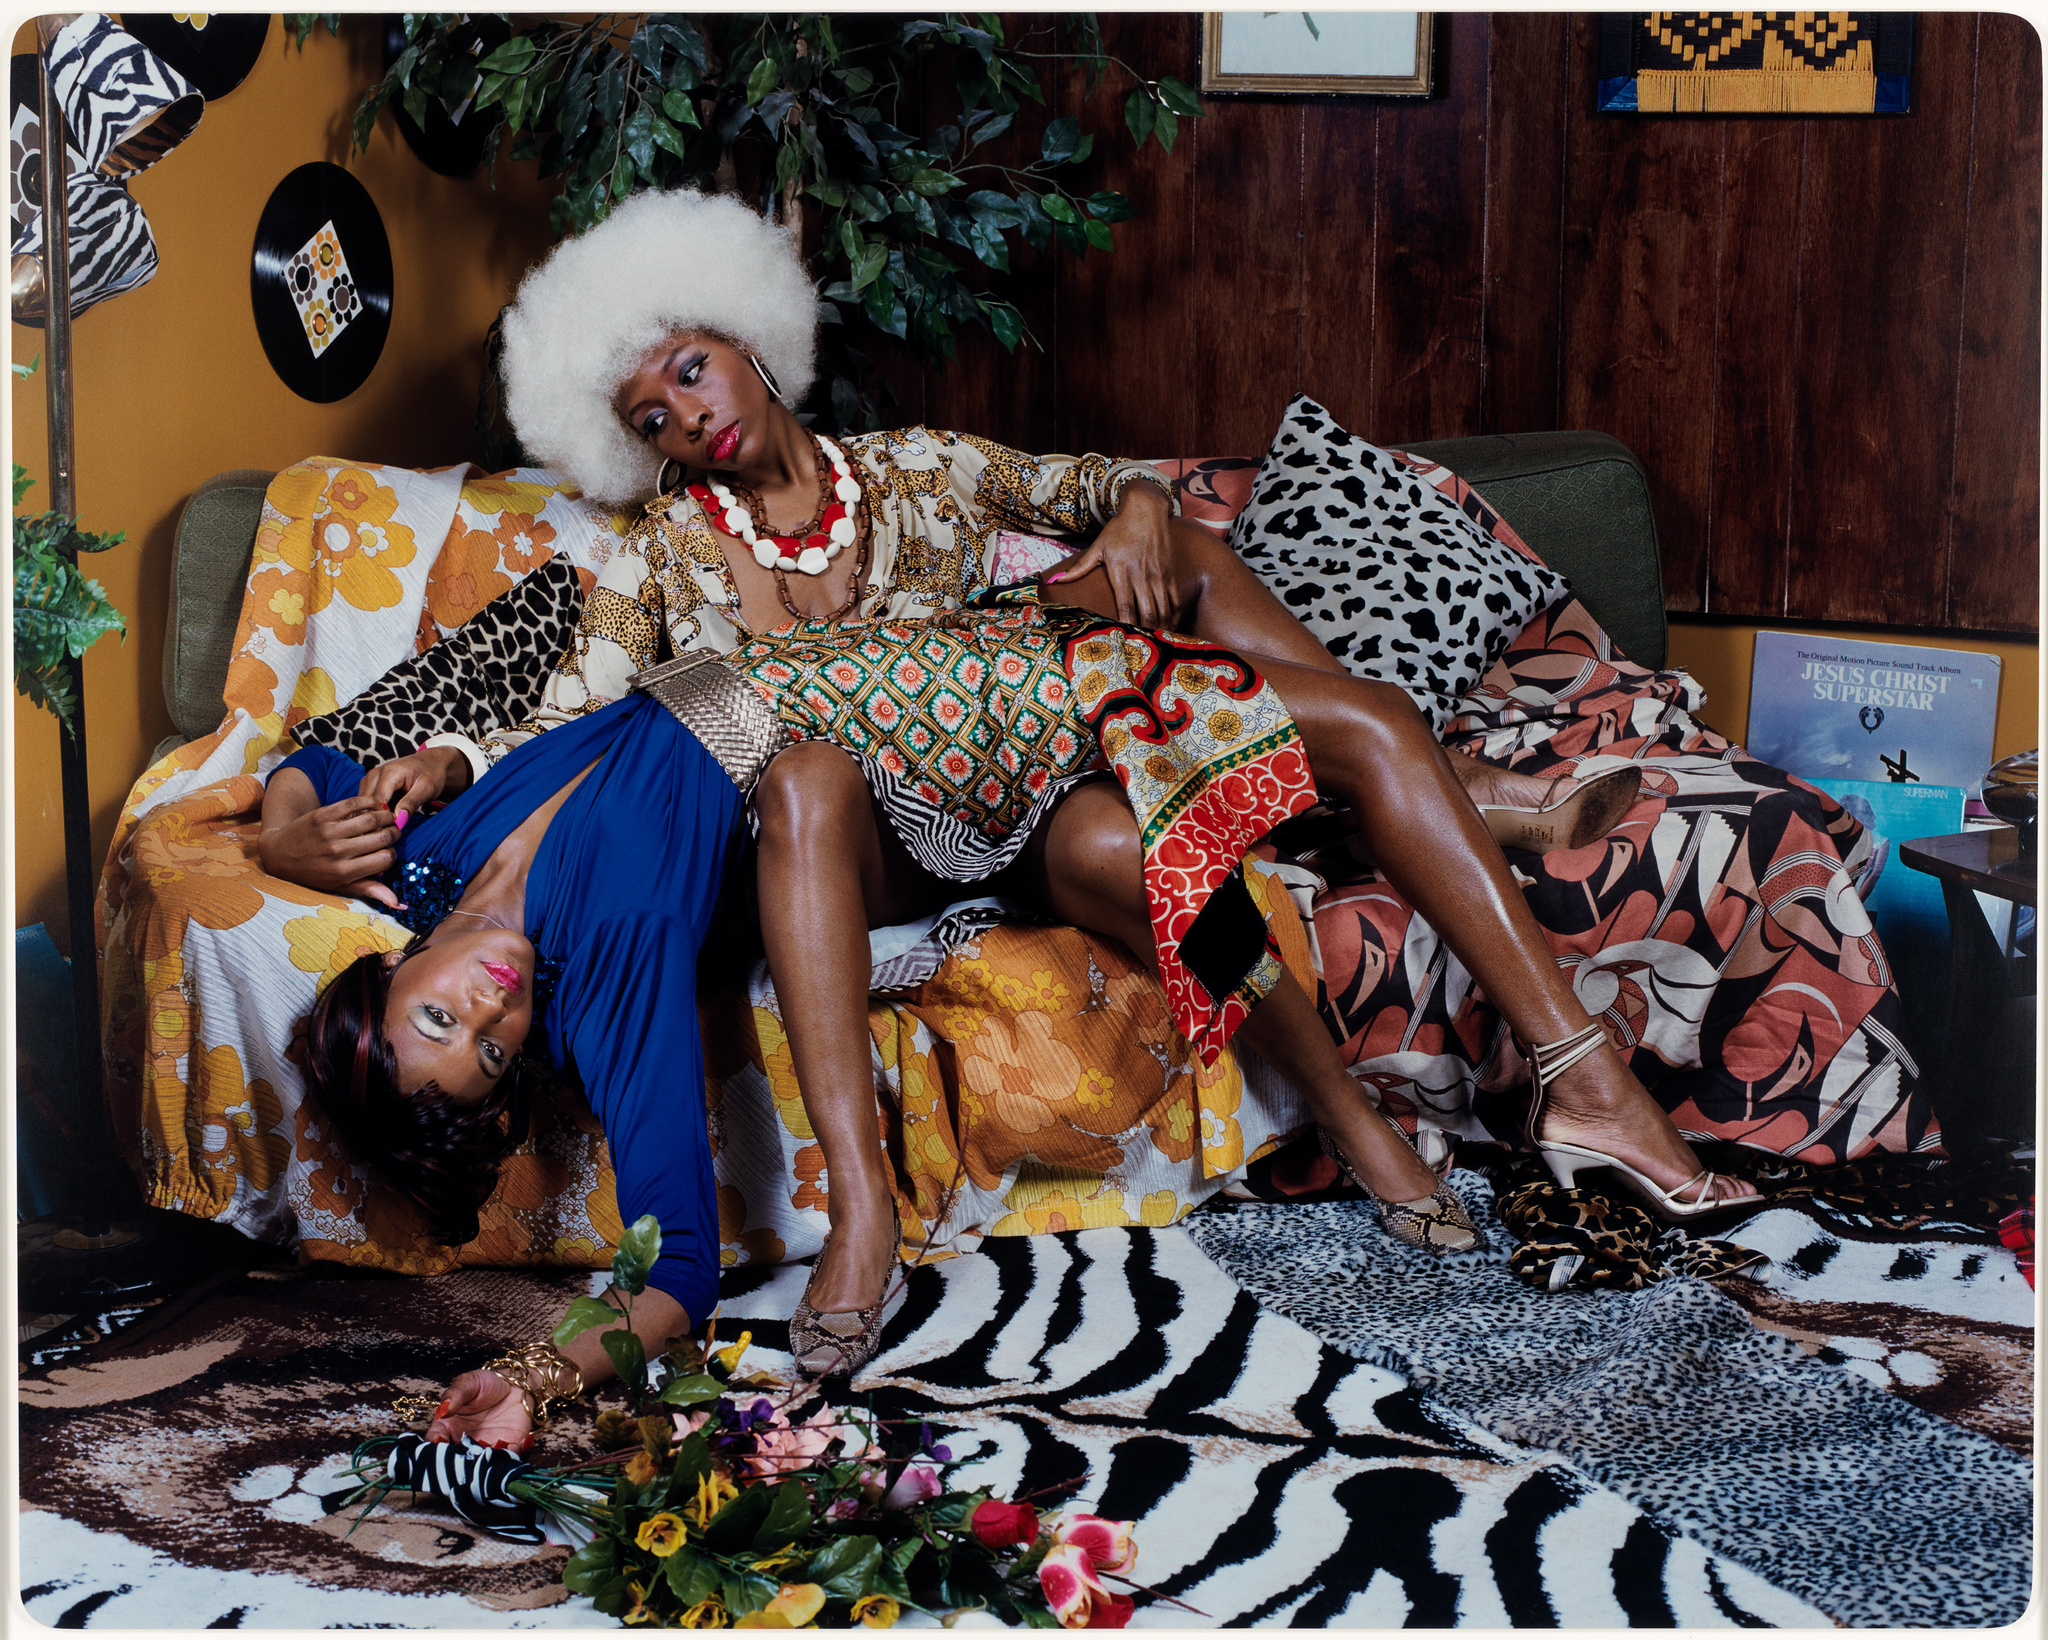 Two Black women in richly-patterned clothing sprawl on a sofa, surrounded by artificial foliage and animal-print textiles